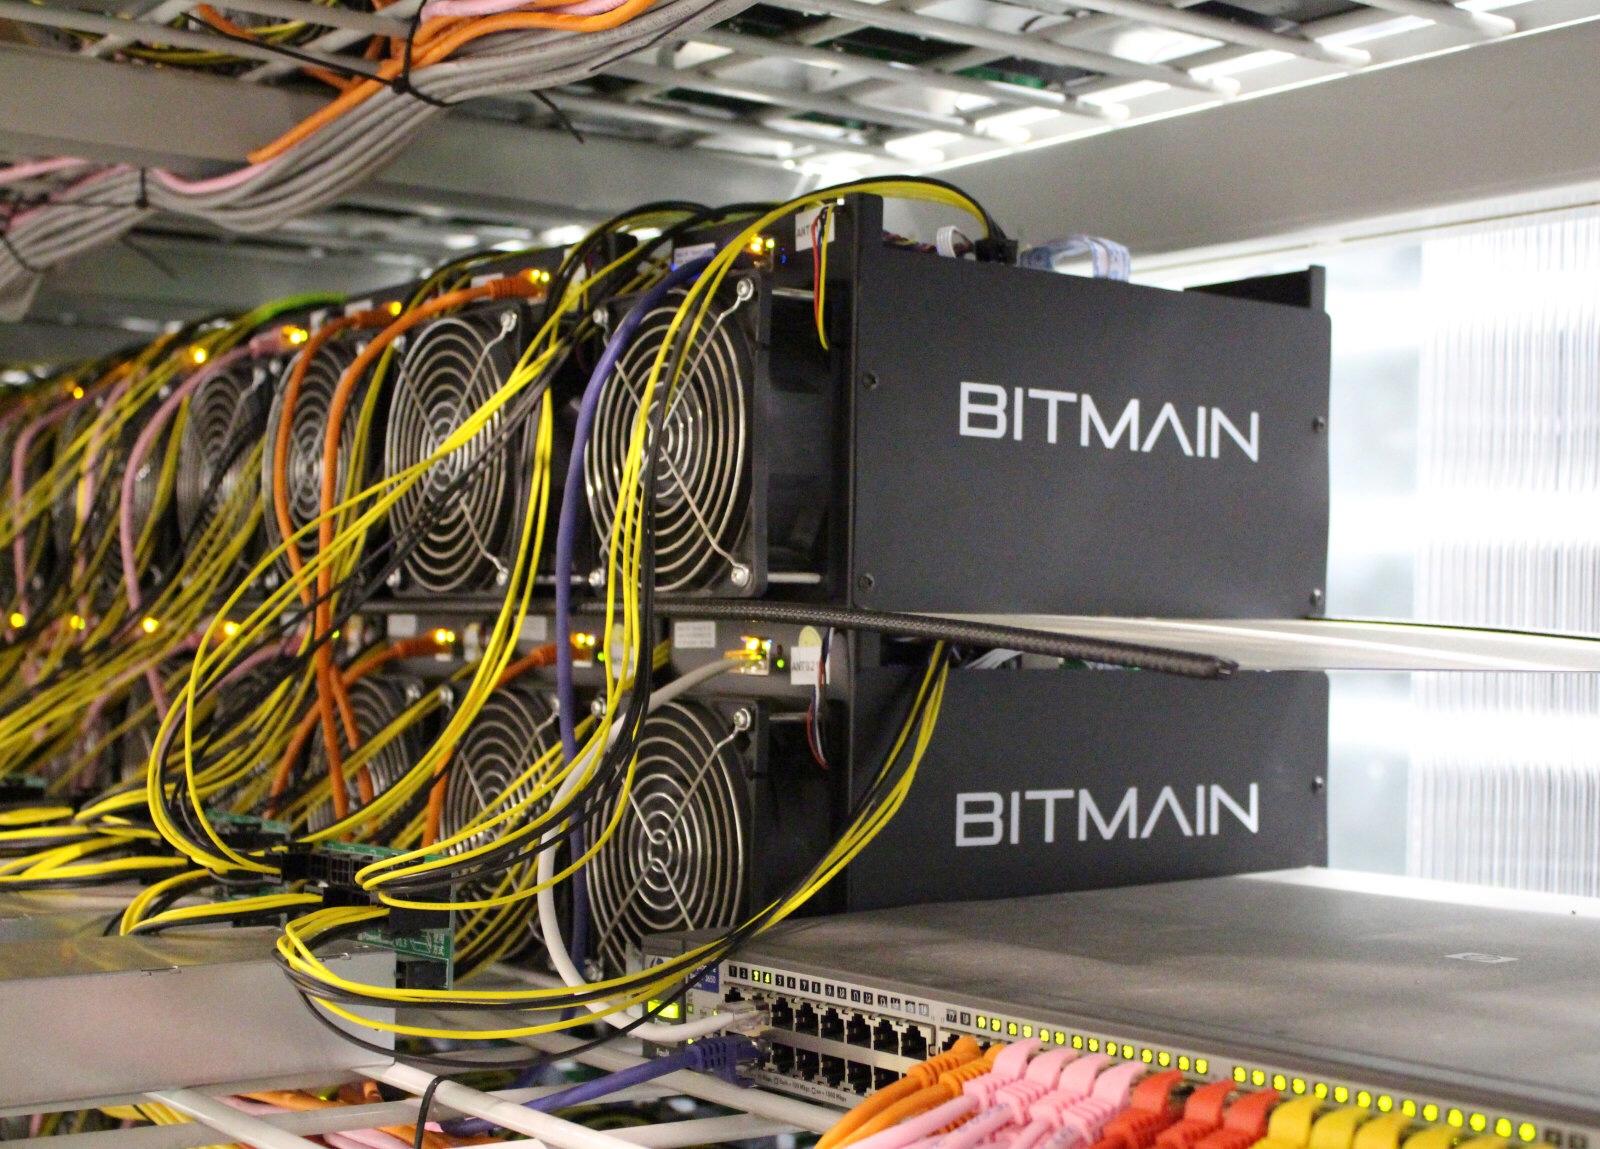 A New York town becomes first city in the US to ban crypto mining